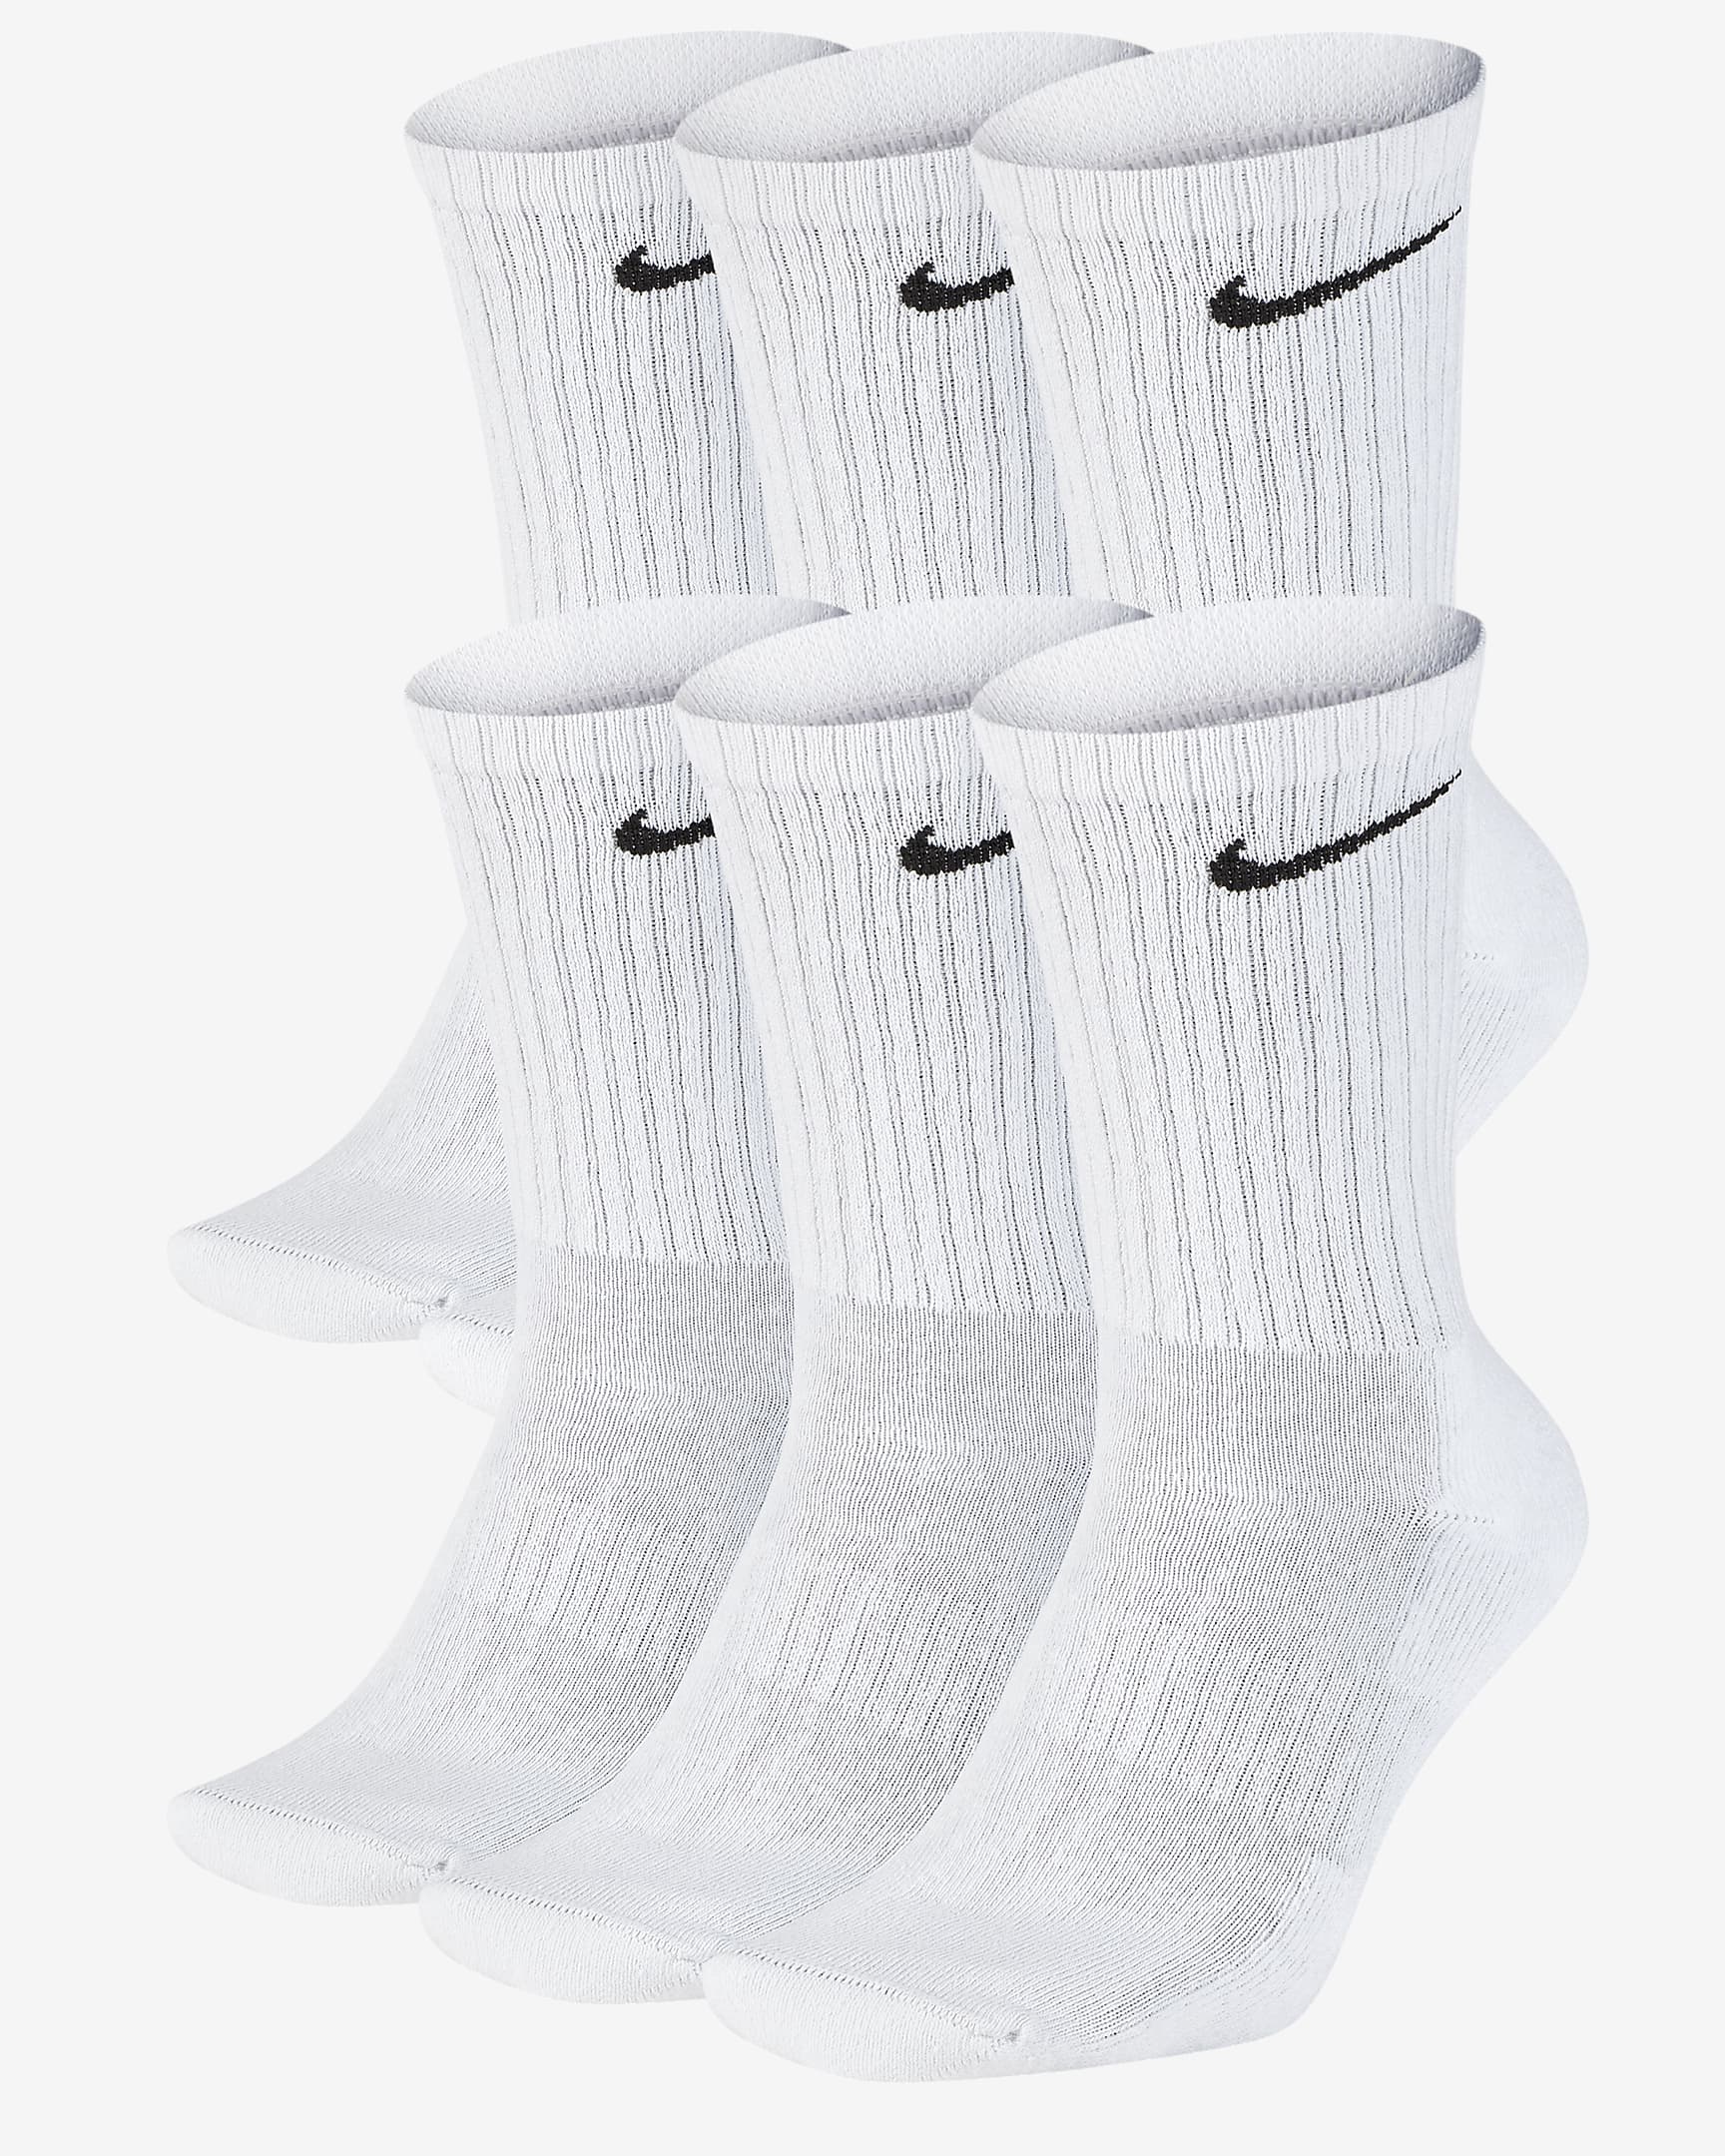 Nike White Everyday Cotton Cushioned Crew Socks 6 Pack - Genuine Design Luxury Consignment for Men. New & Pre-Owned Clothing, Shoes, & Accessories. Calgary, Canada